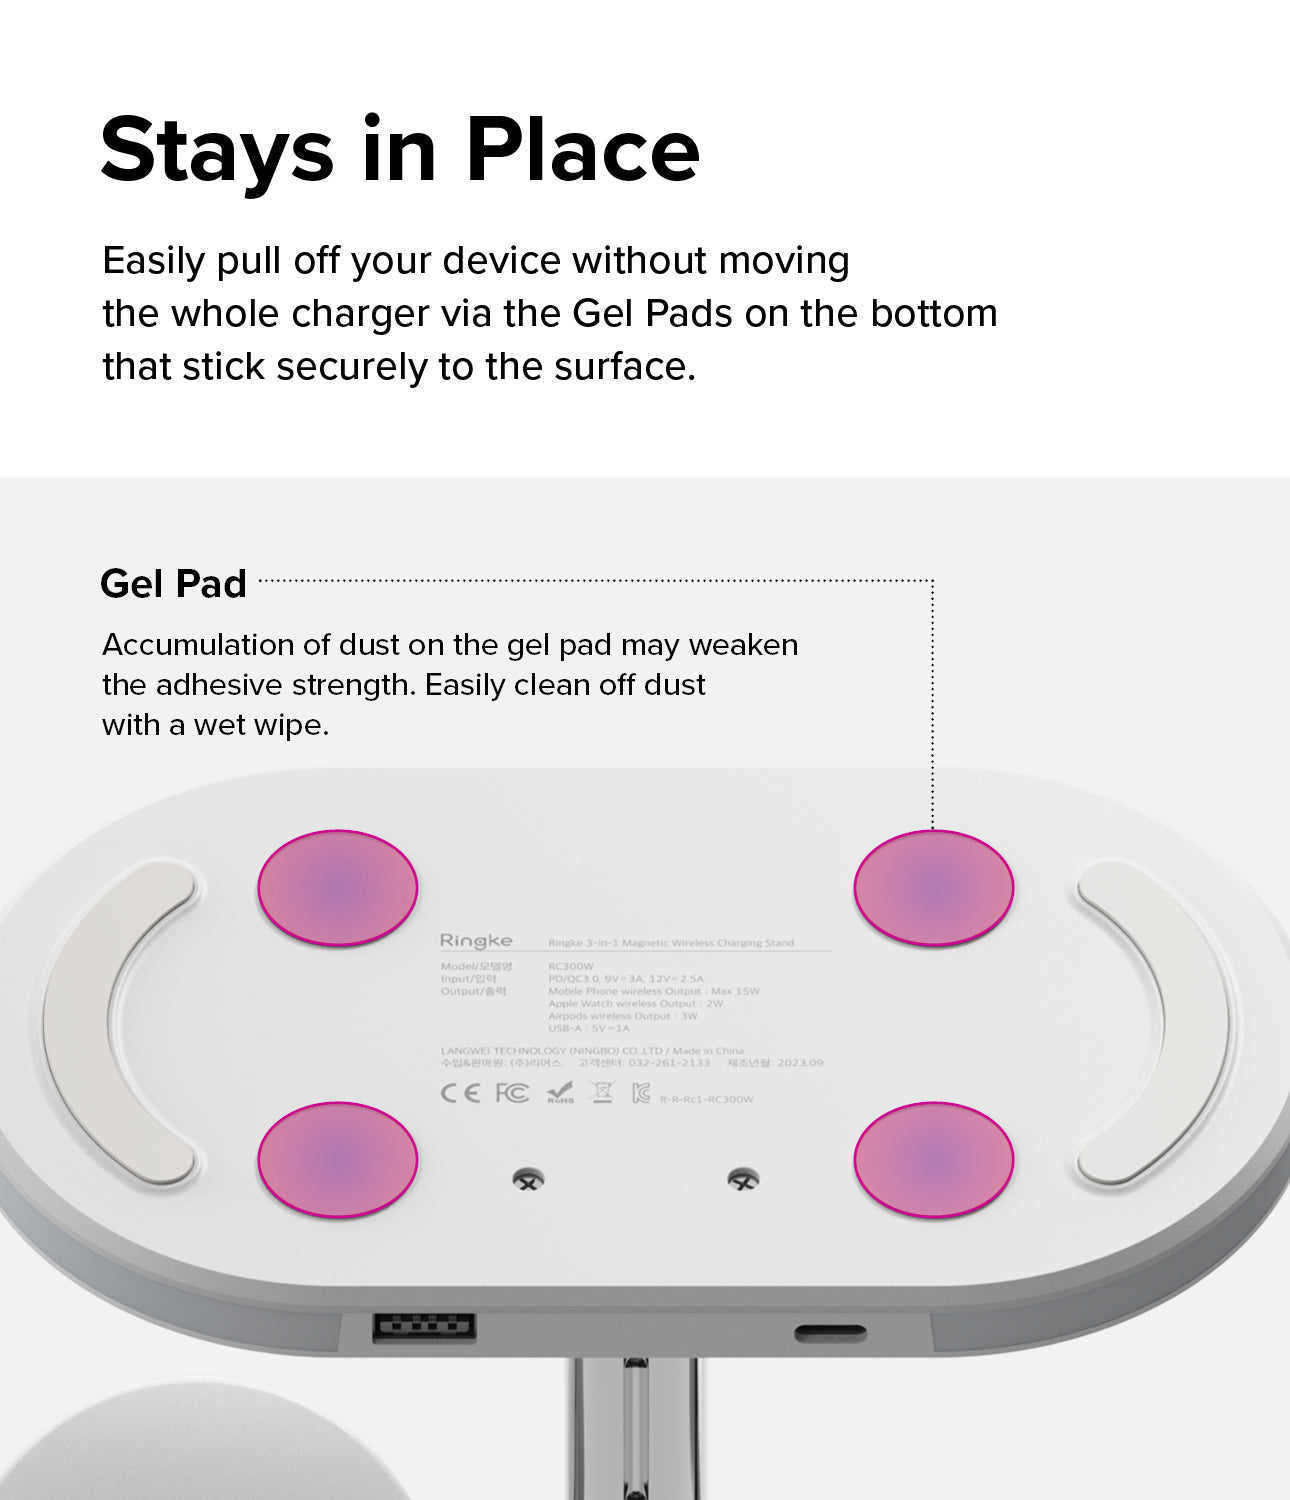 Ringke 3-in-1 Wireless Charger Stand - Stays in Place. Easily pull off your device without moving the whole charger via the Gel Pads on the bottom that stick securely to the surface. Accumulation of dust on the gel pad may weaken the adhesive strength. Easily clean off dust with a wet wipe.